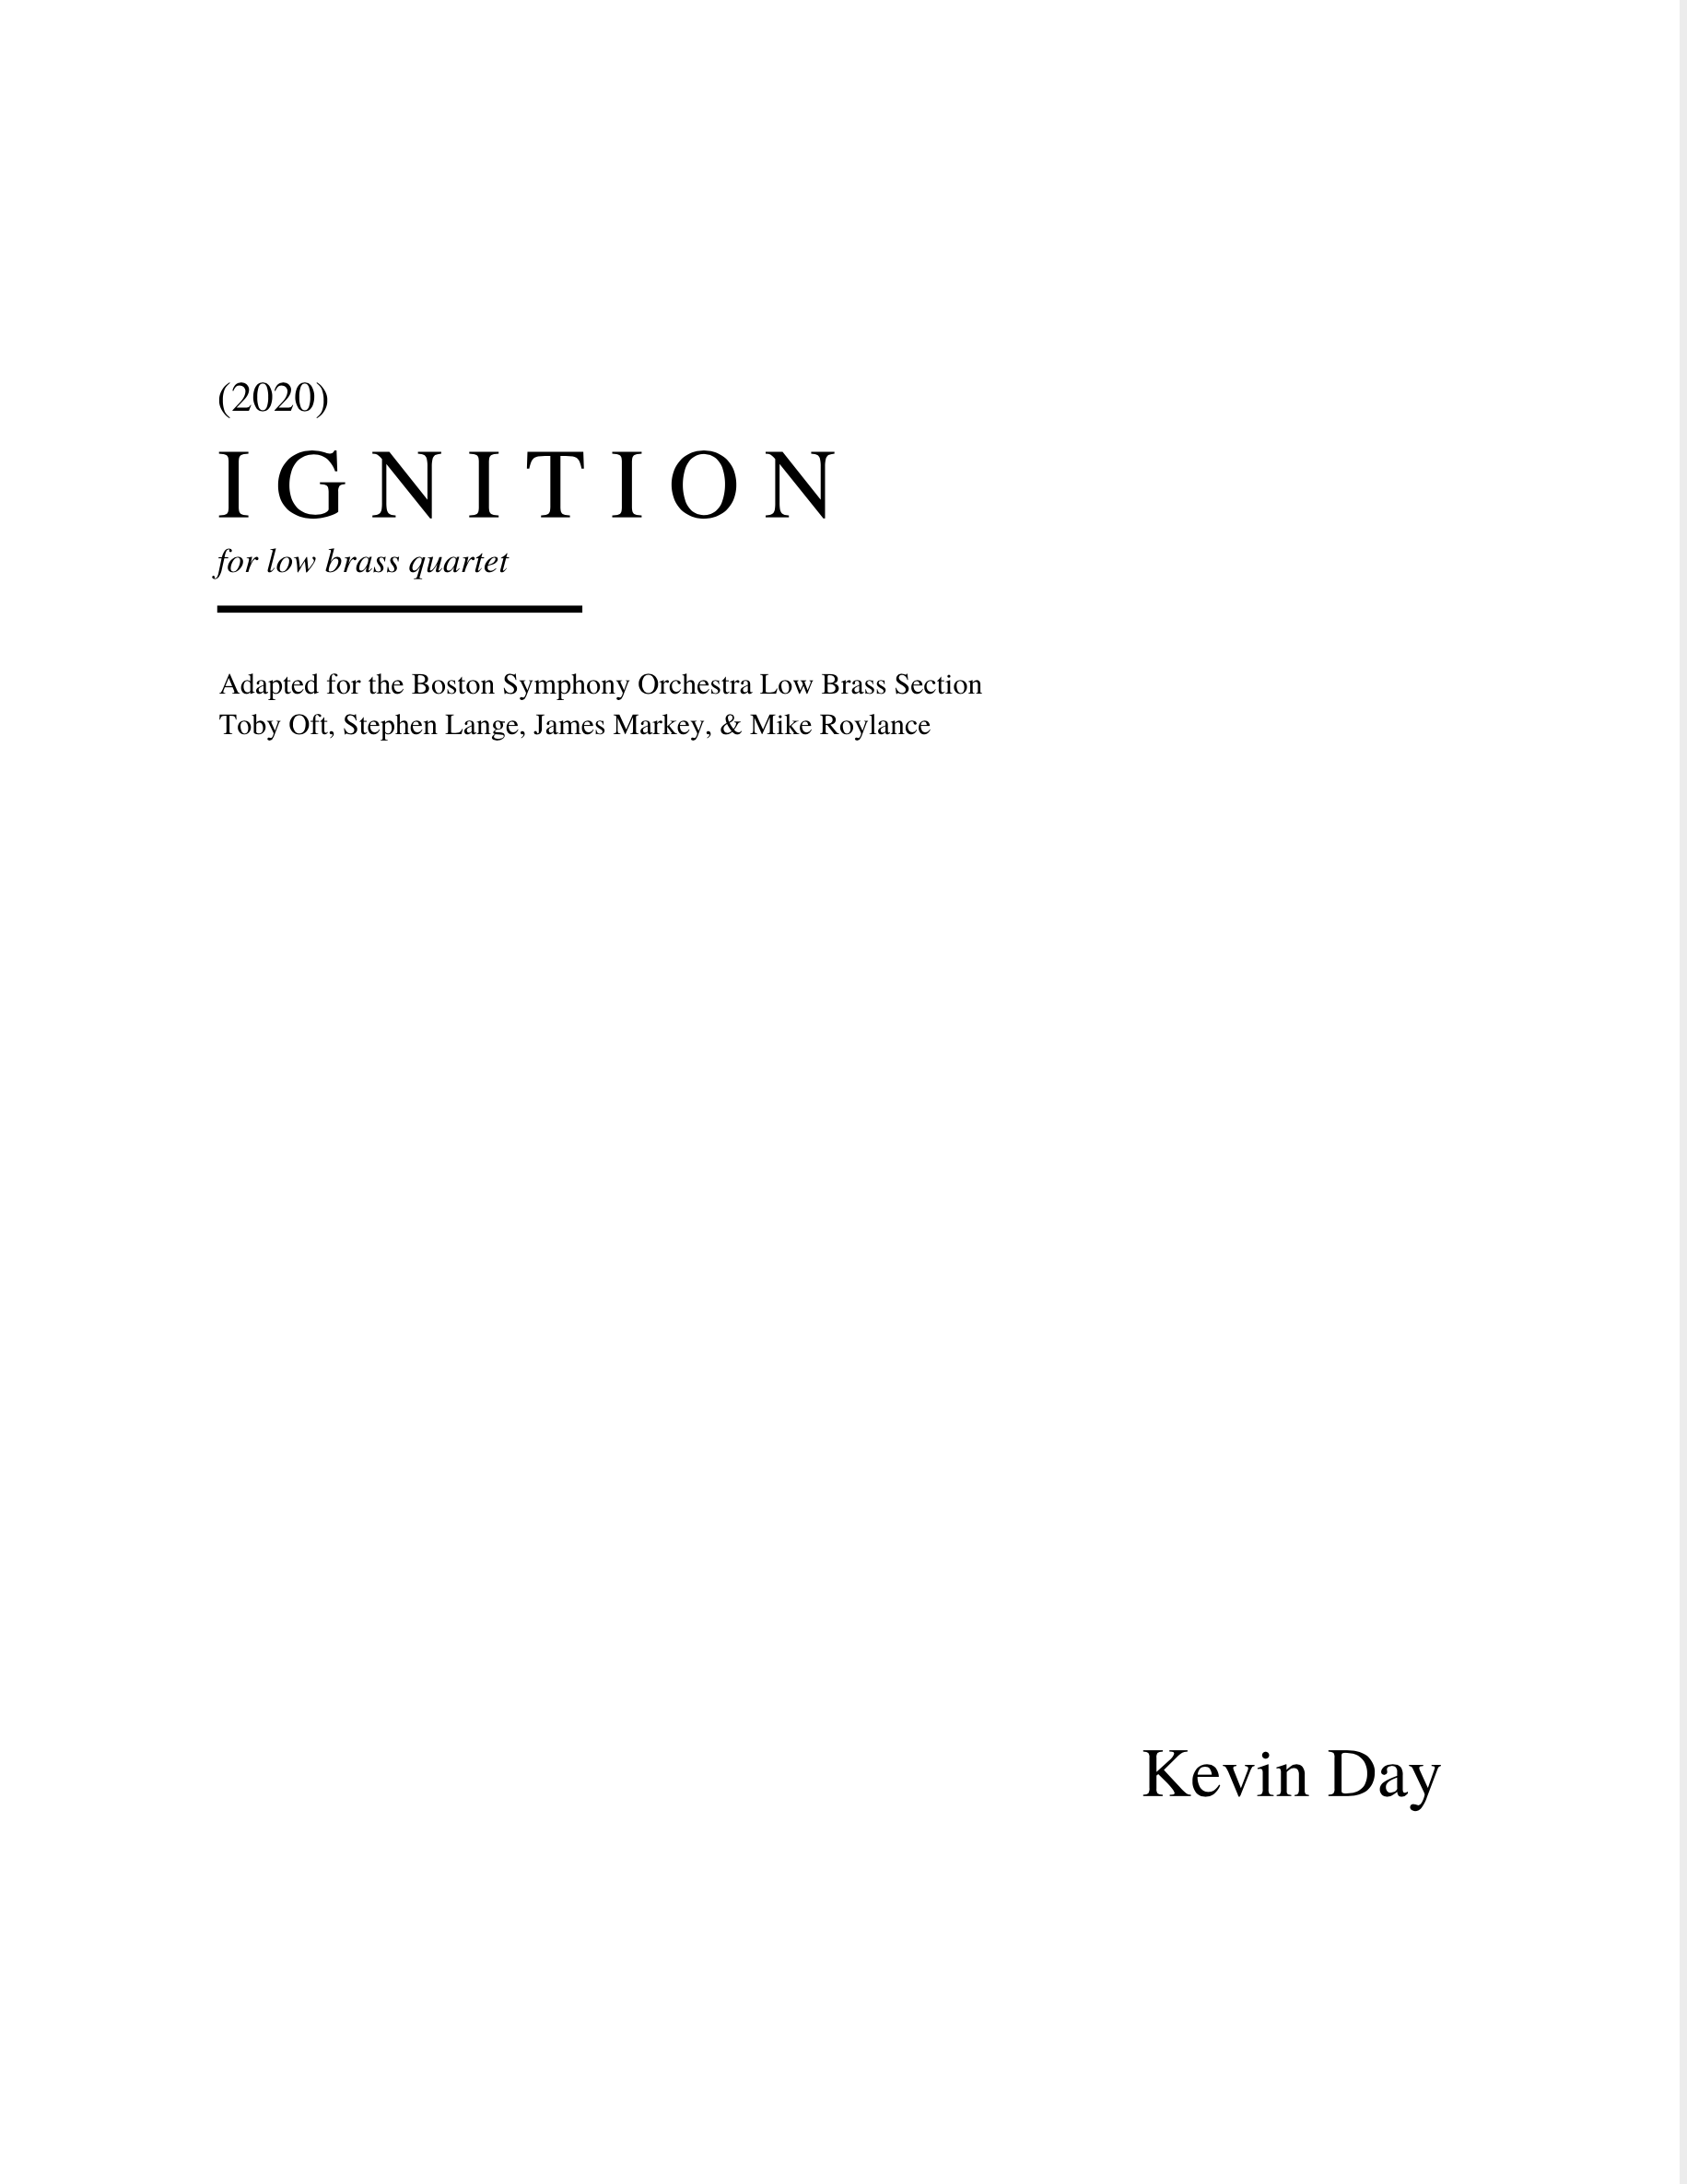 Ignition (PDF Version) by Kevin Day